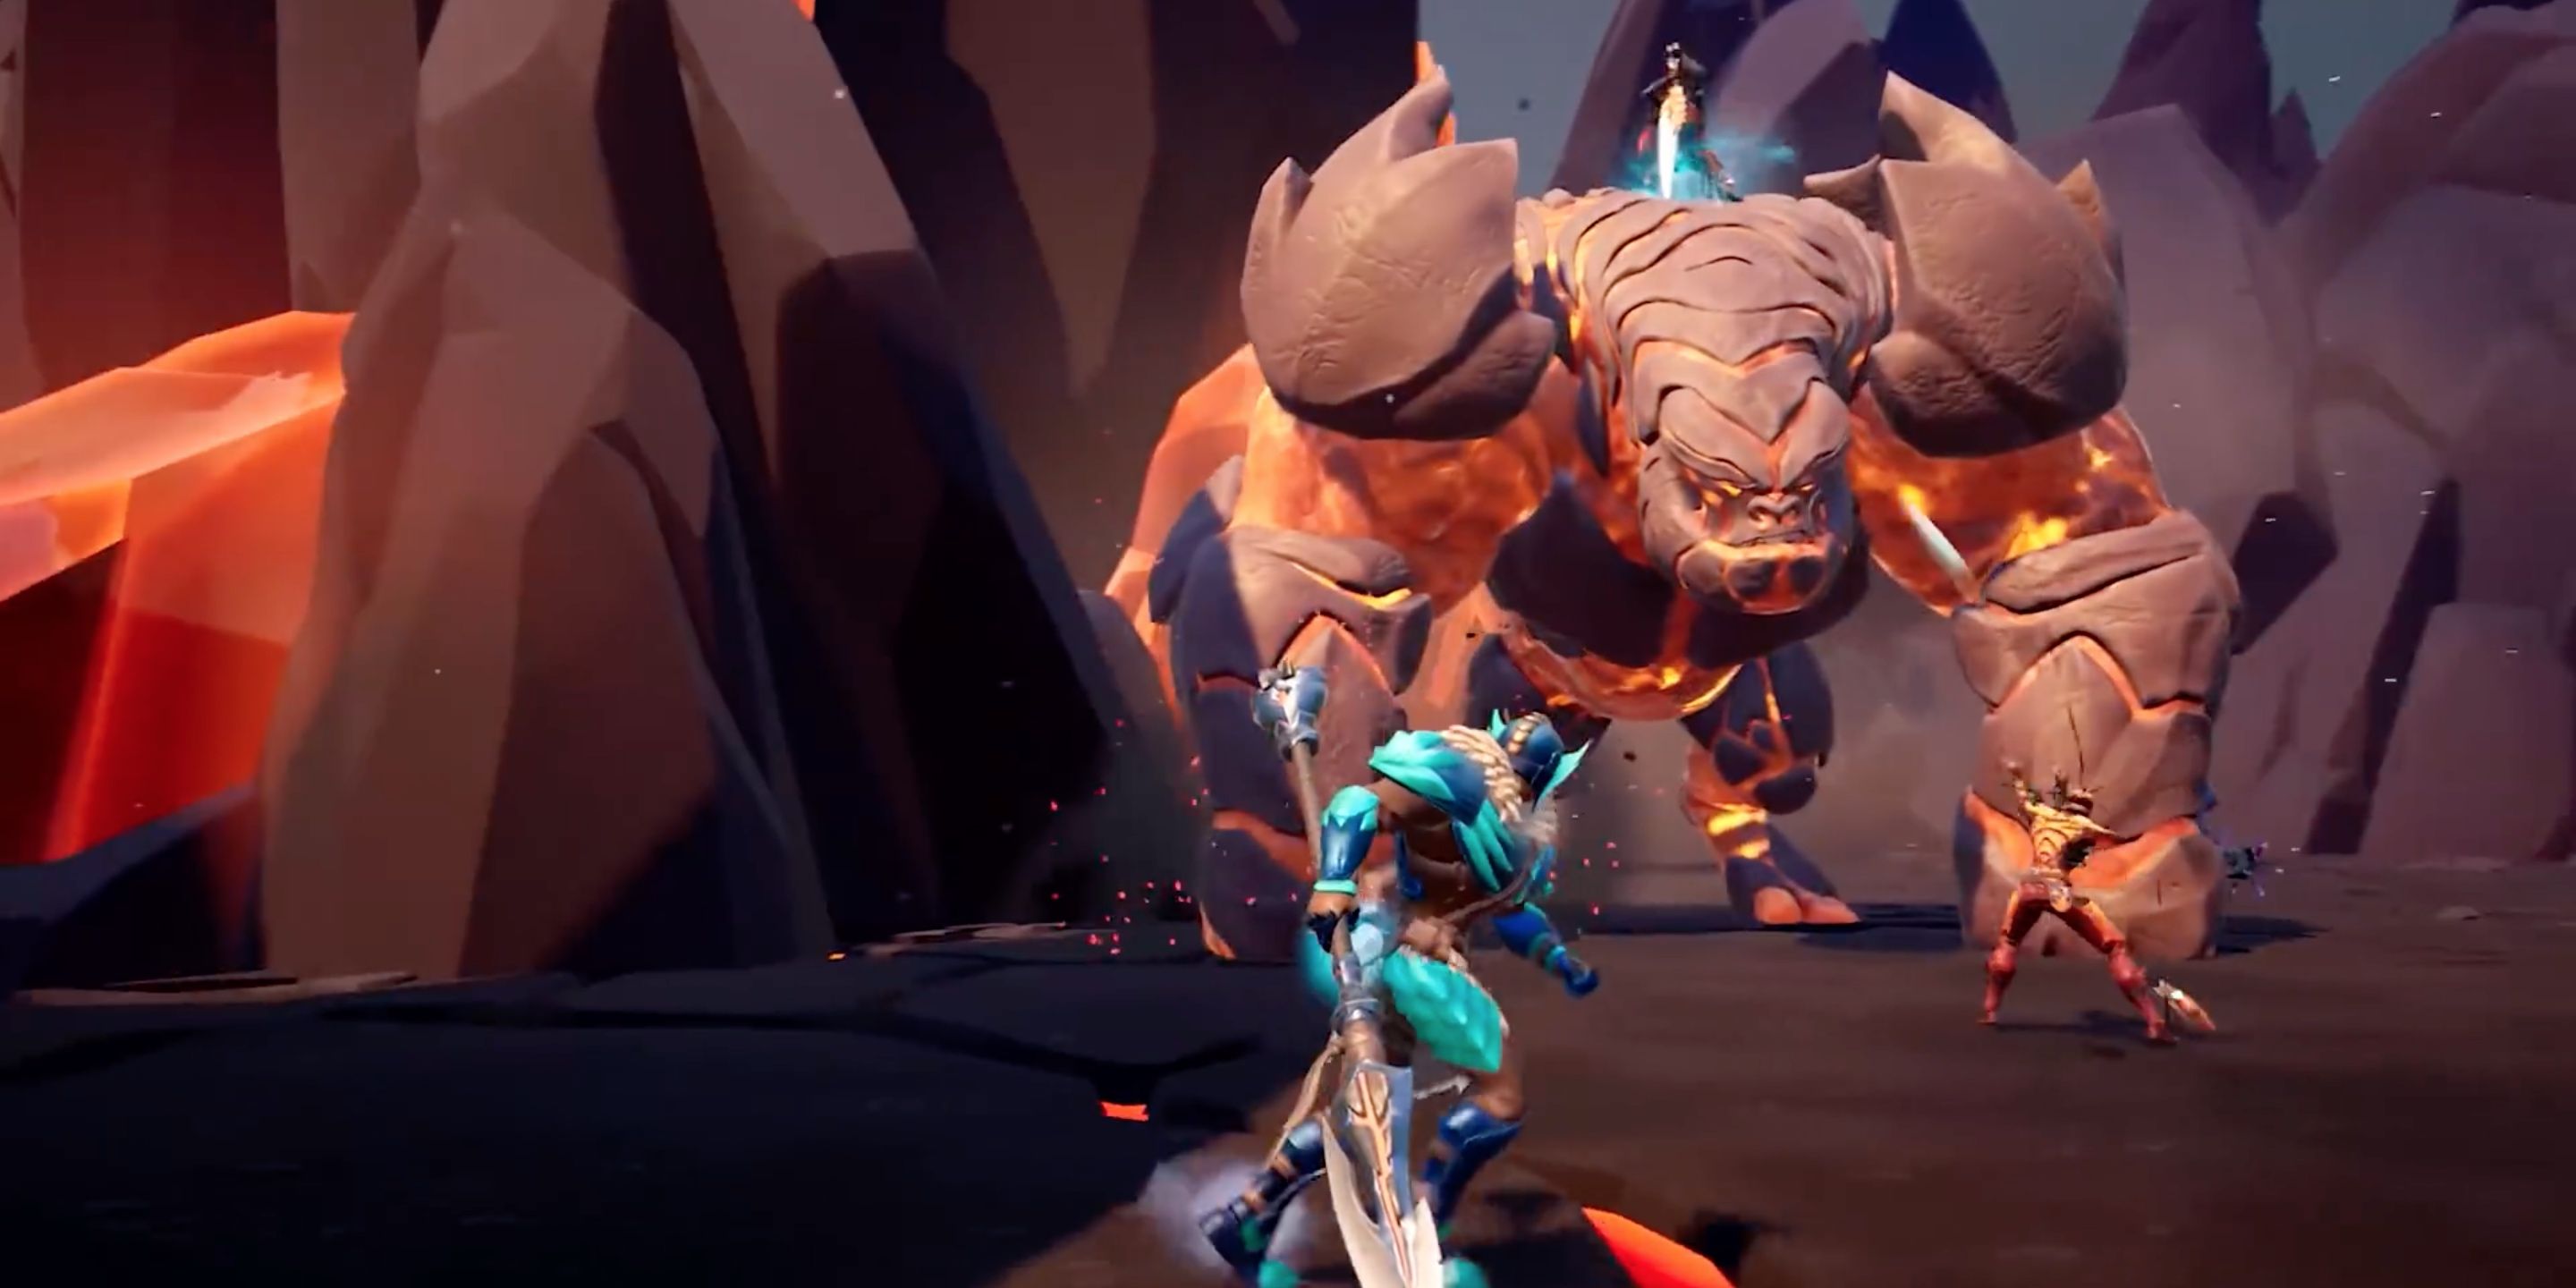 Player mounting the head of Torgadoro in Dauntless